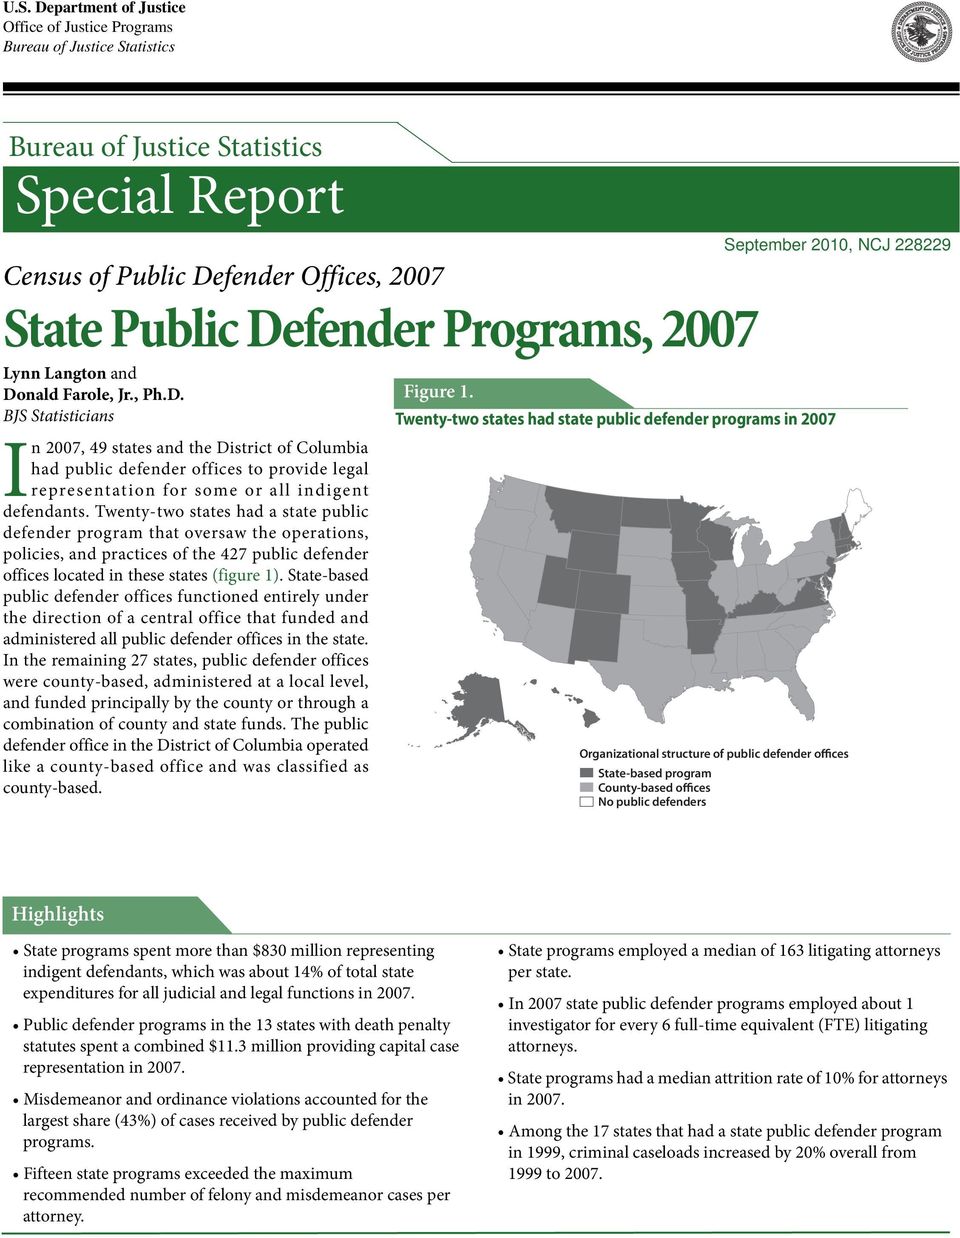 Twenty-two states had a state public defender program that oversaw the operations, policies, and practices of the 427 public defender offices located in these states (figure 1).